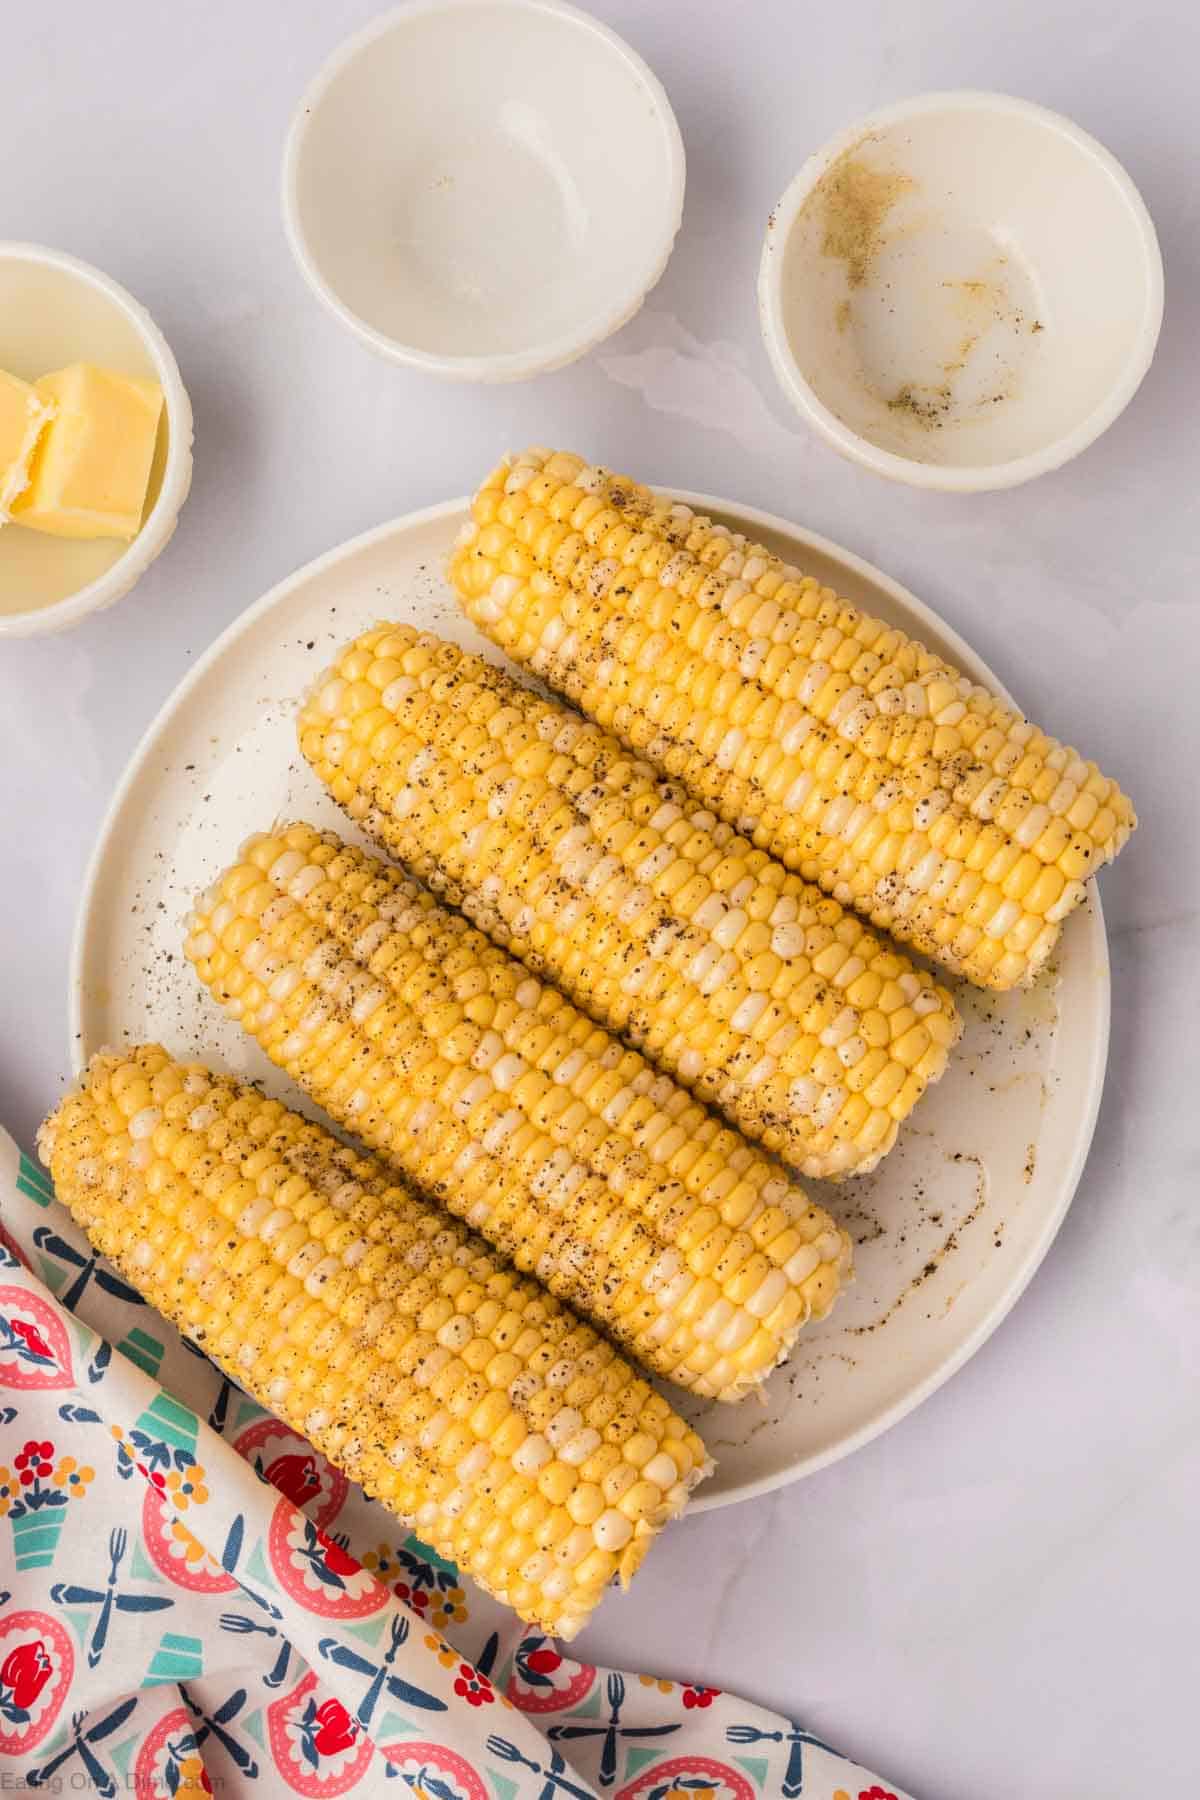 Four seasoned ears of corn, prepared as Air Fryer Corn on the Cob, are neatly arranged on a white plate with a sprinkle of pepper visible on their surface. Beside the plate, three small bowls sit, one containing a small piece of butter. A colorful, patterned cloth is partially visible in the foreground.